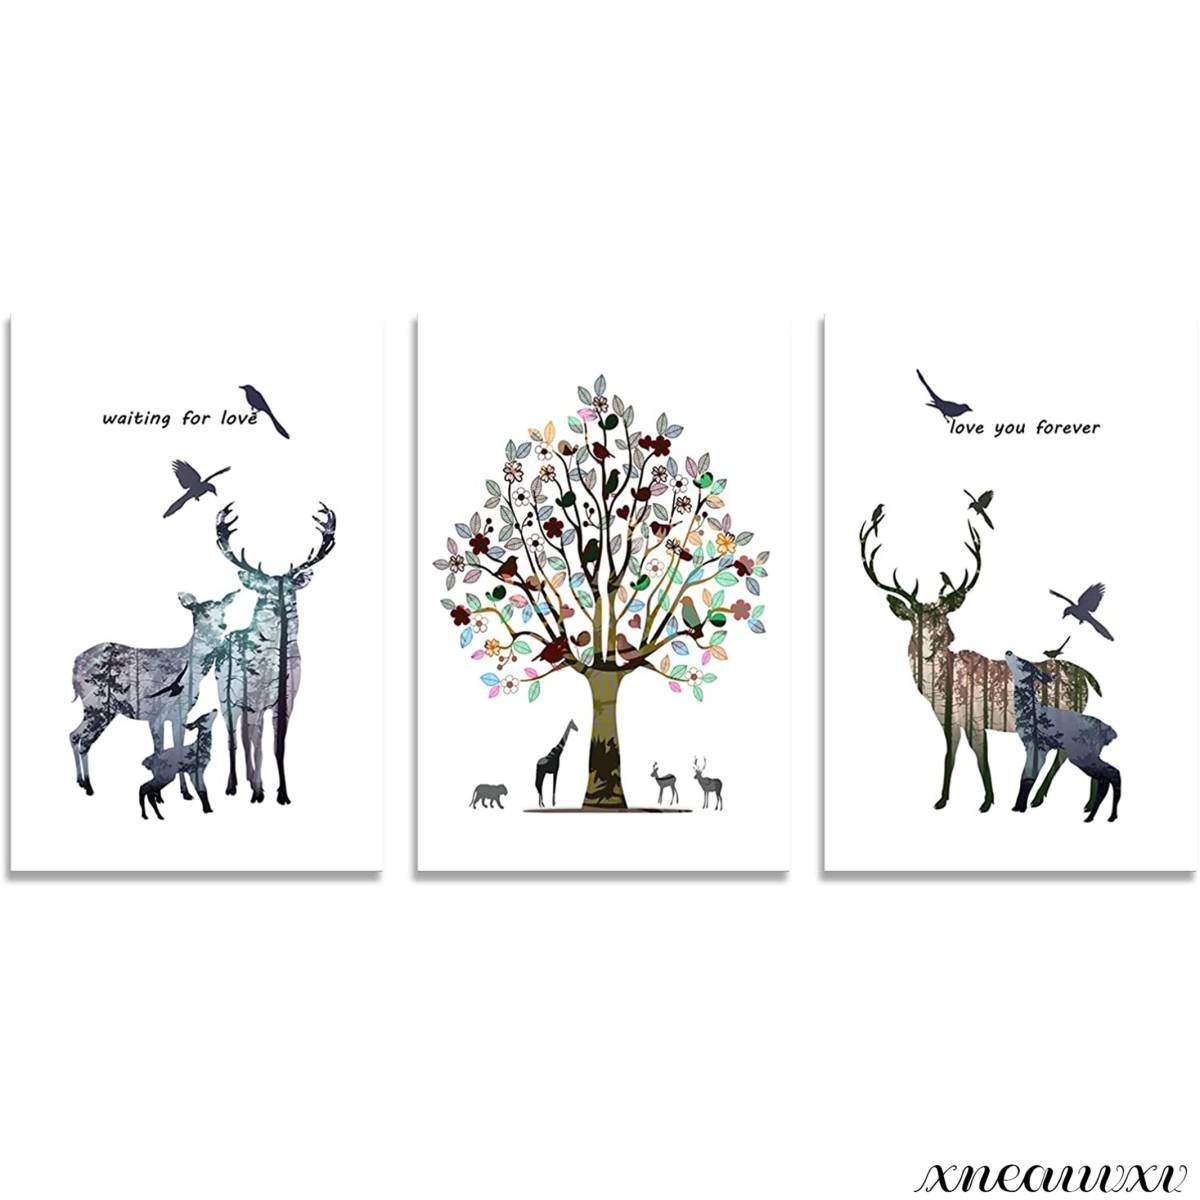 Art panel interior room decoration decoration canvas painting lightweight 3 panels landscape painting stylish Nordic nature forest mountain forest elk deer bird, Artwork, Painting, graphic